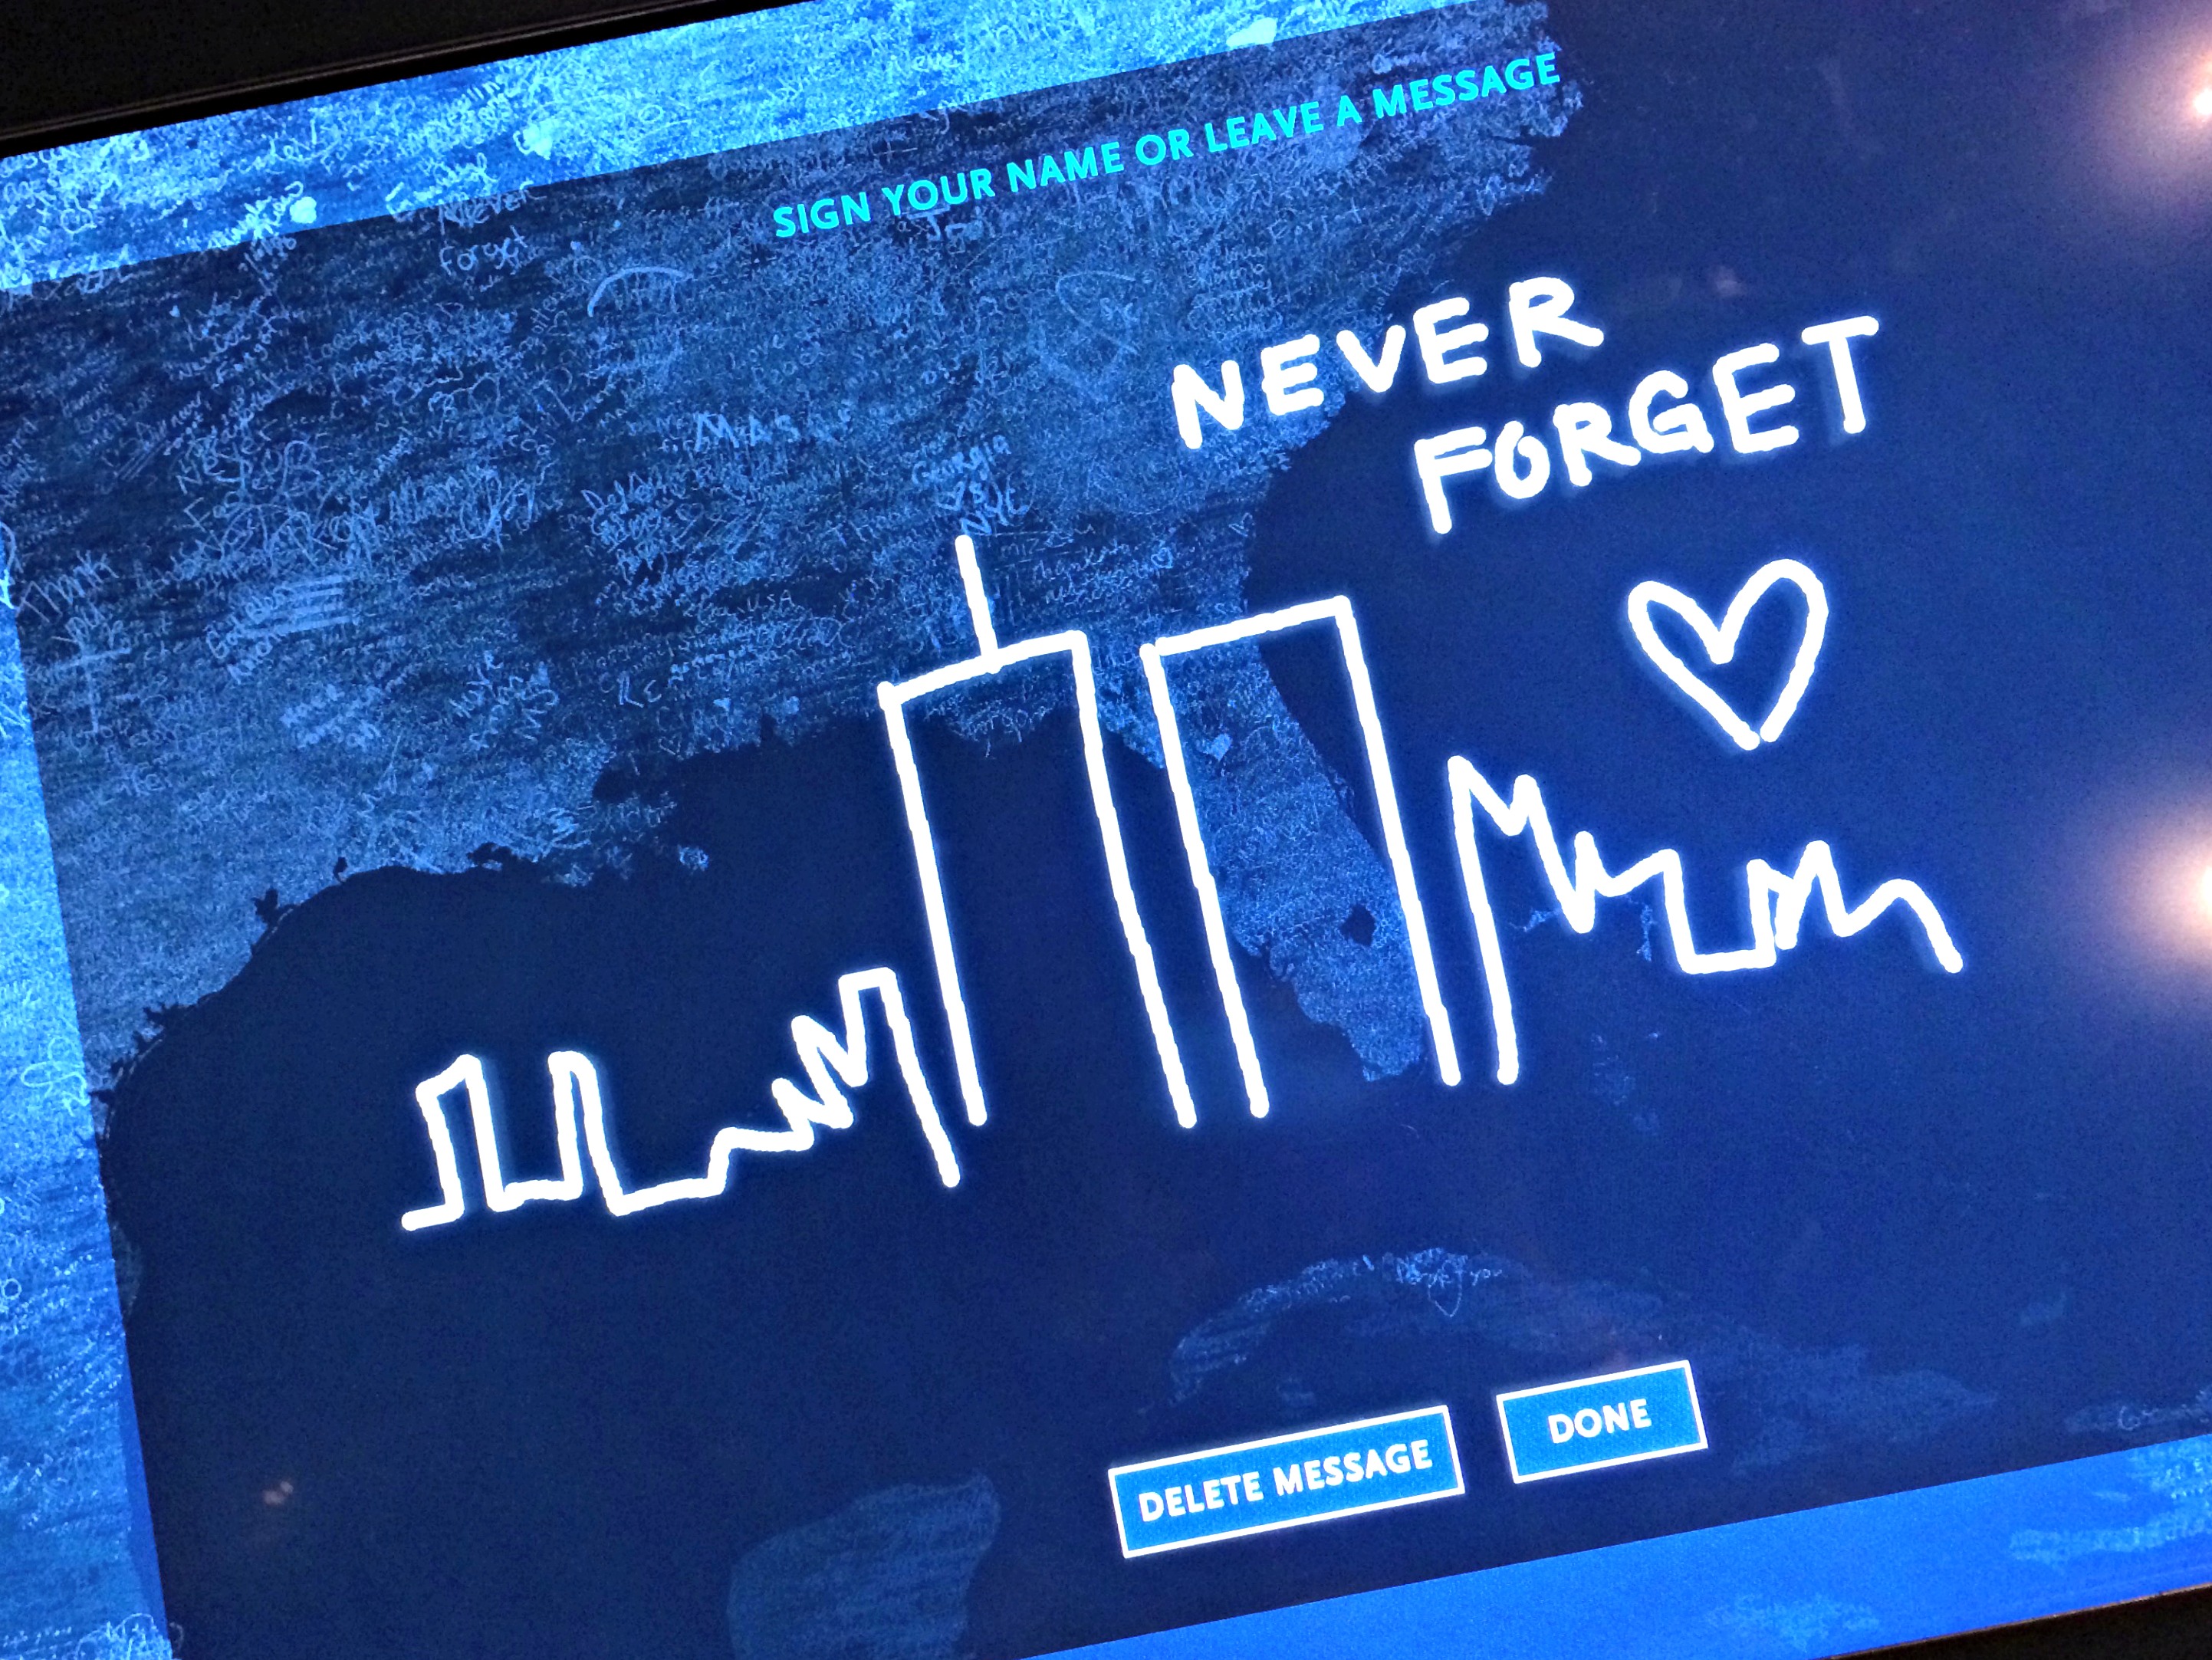 911 Memorial Museum leave a message